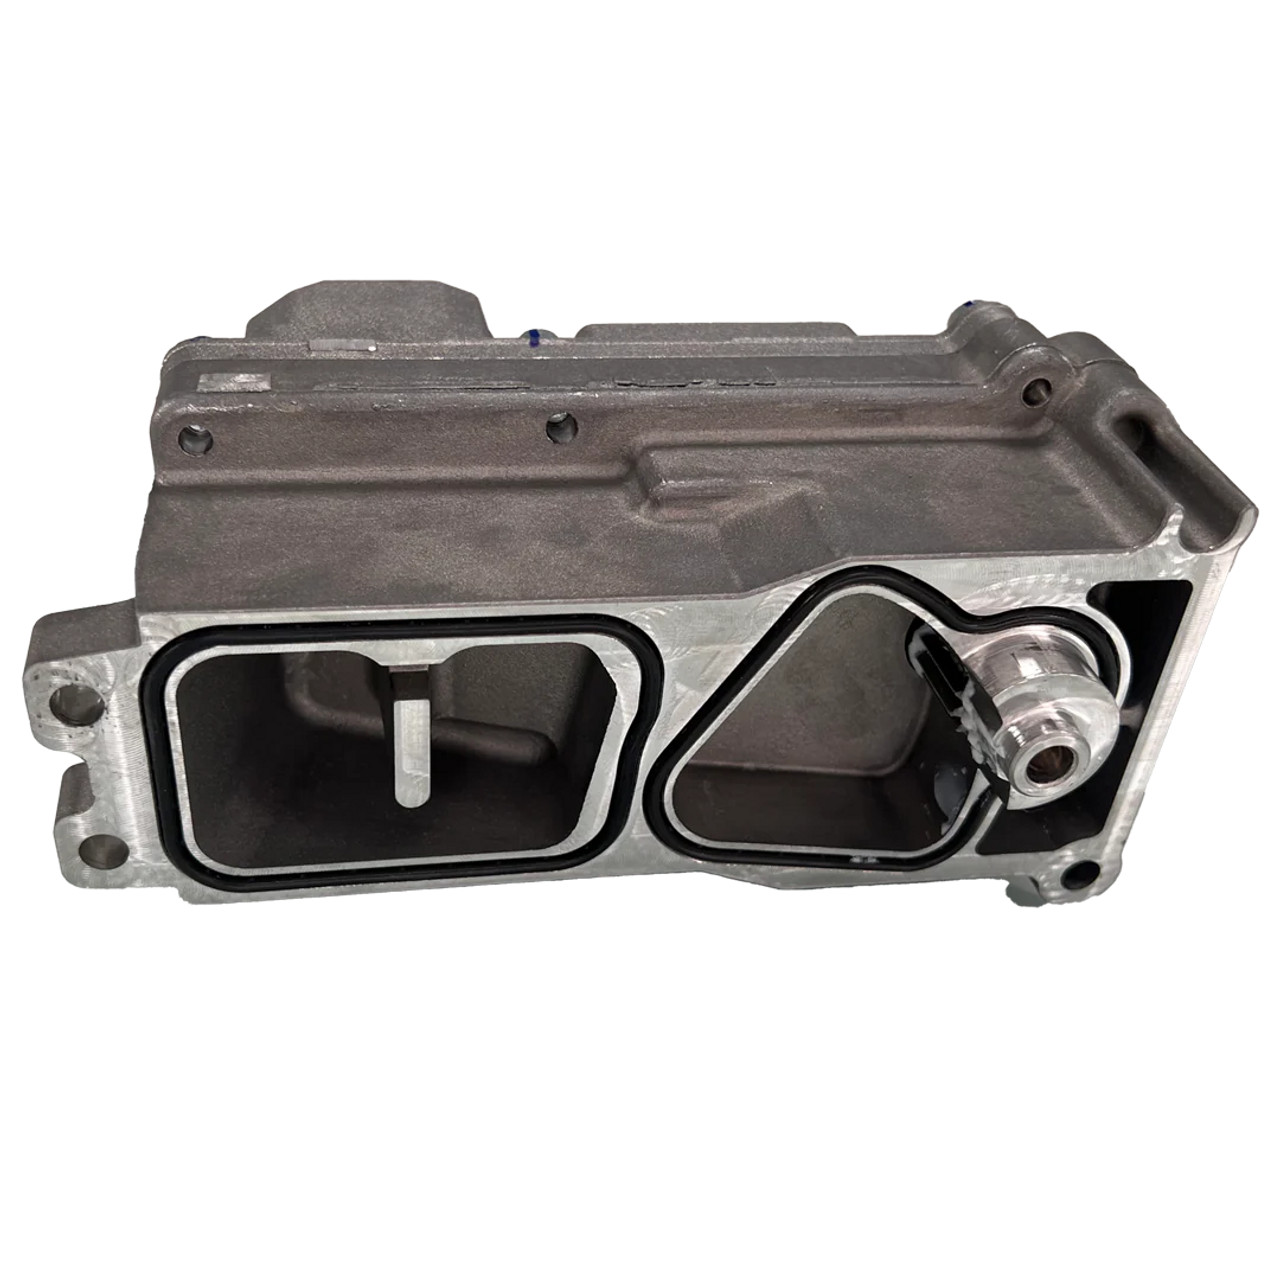 Holset Actuator for 2OO7.5 to 2012 Dodge/Ram 6.7L Cummins (302440) This View